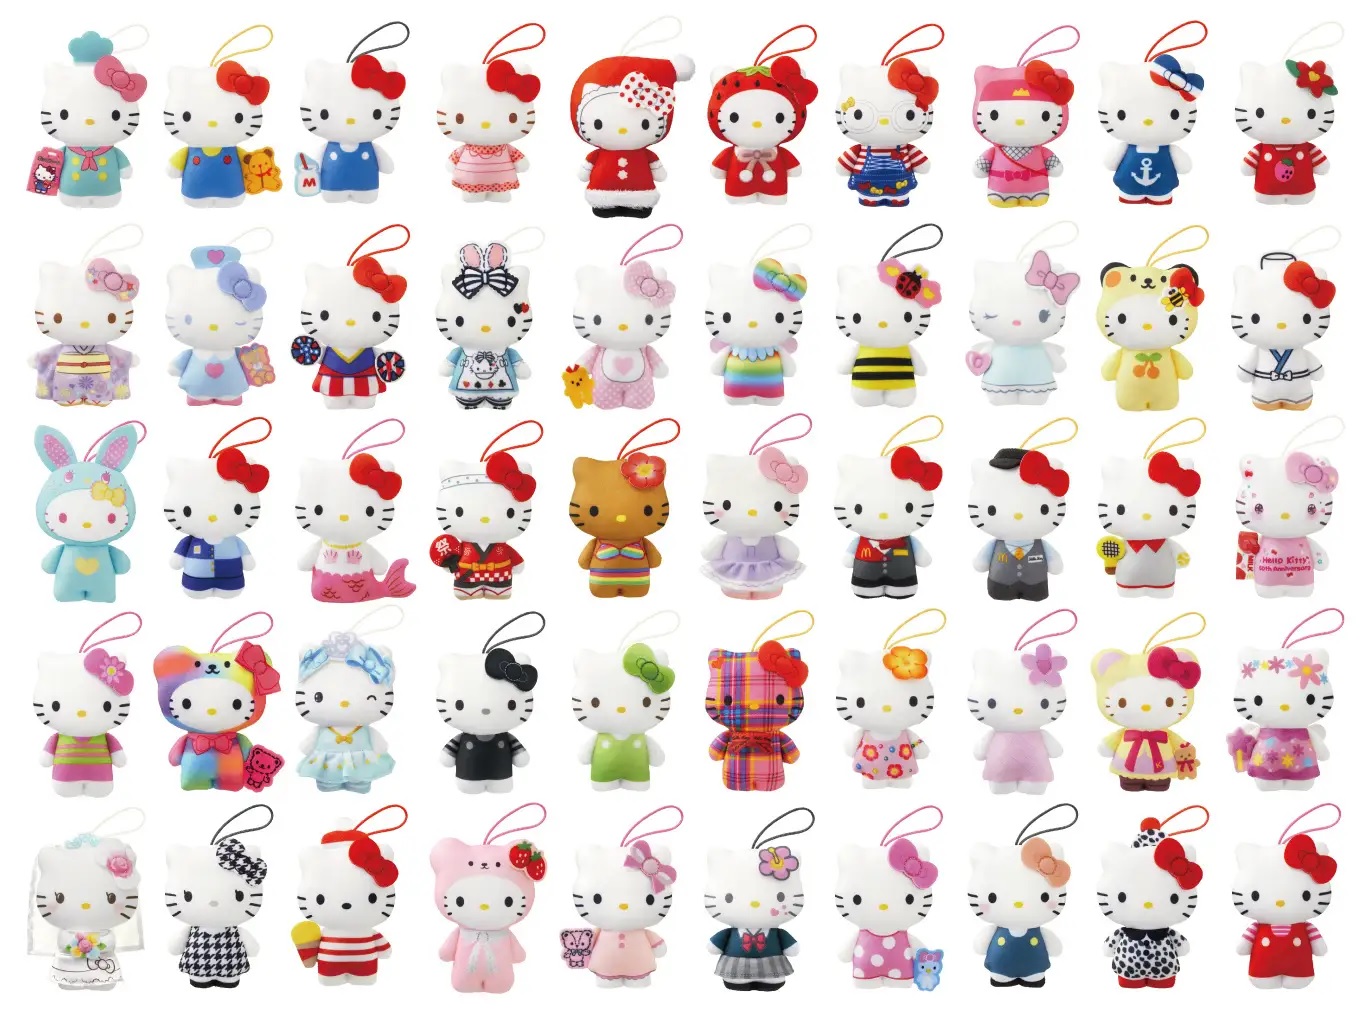 50 different Hello Kitties from across kawaii history appear in